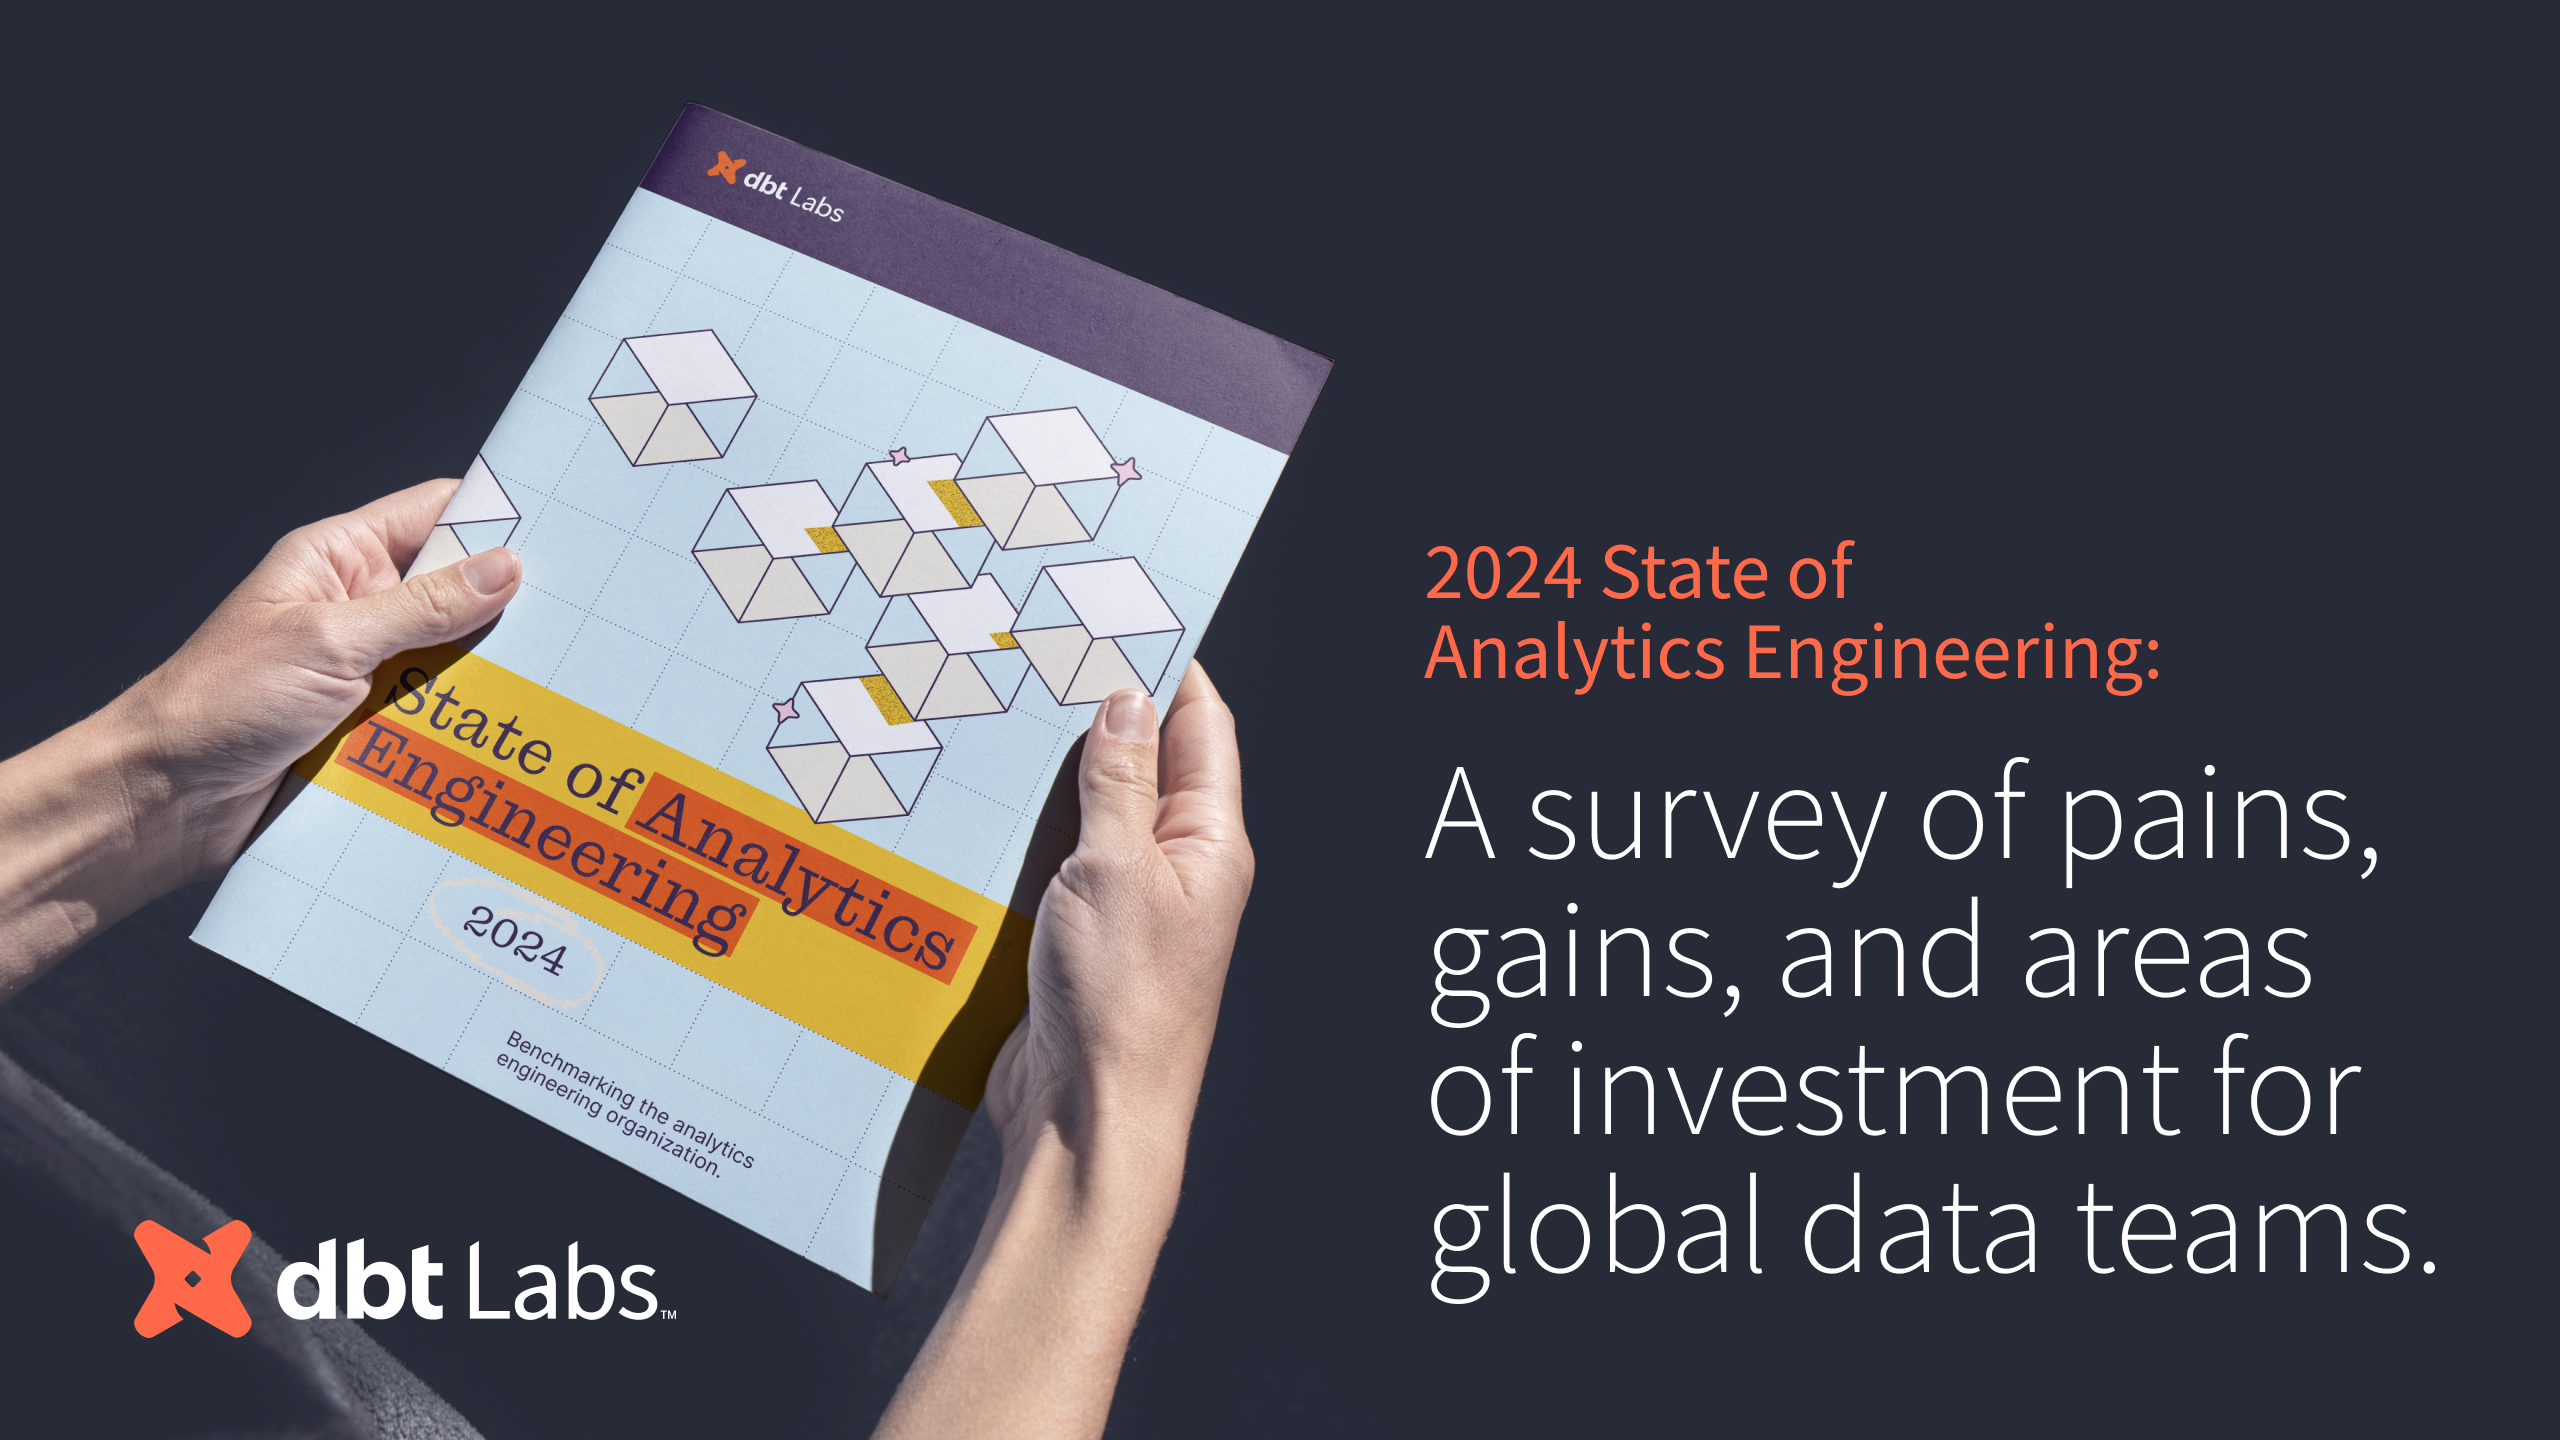 The 2024 State of Analytics Engineering report